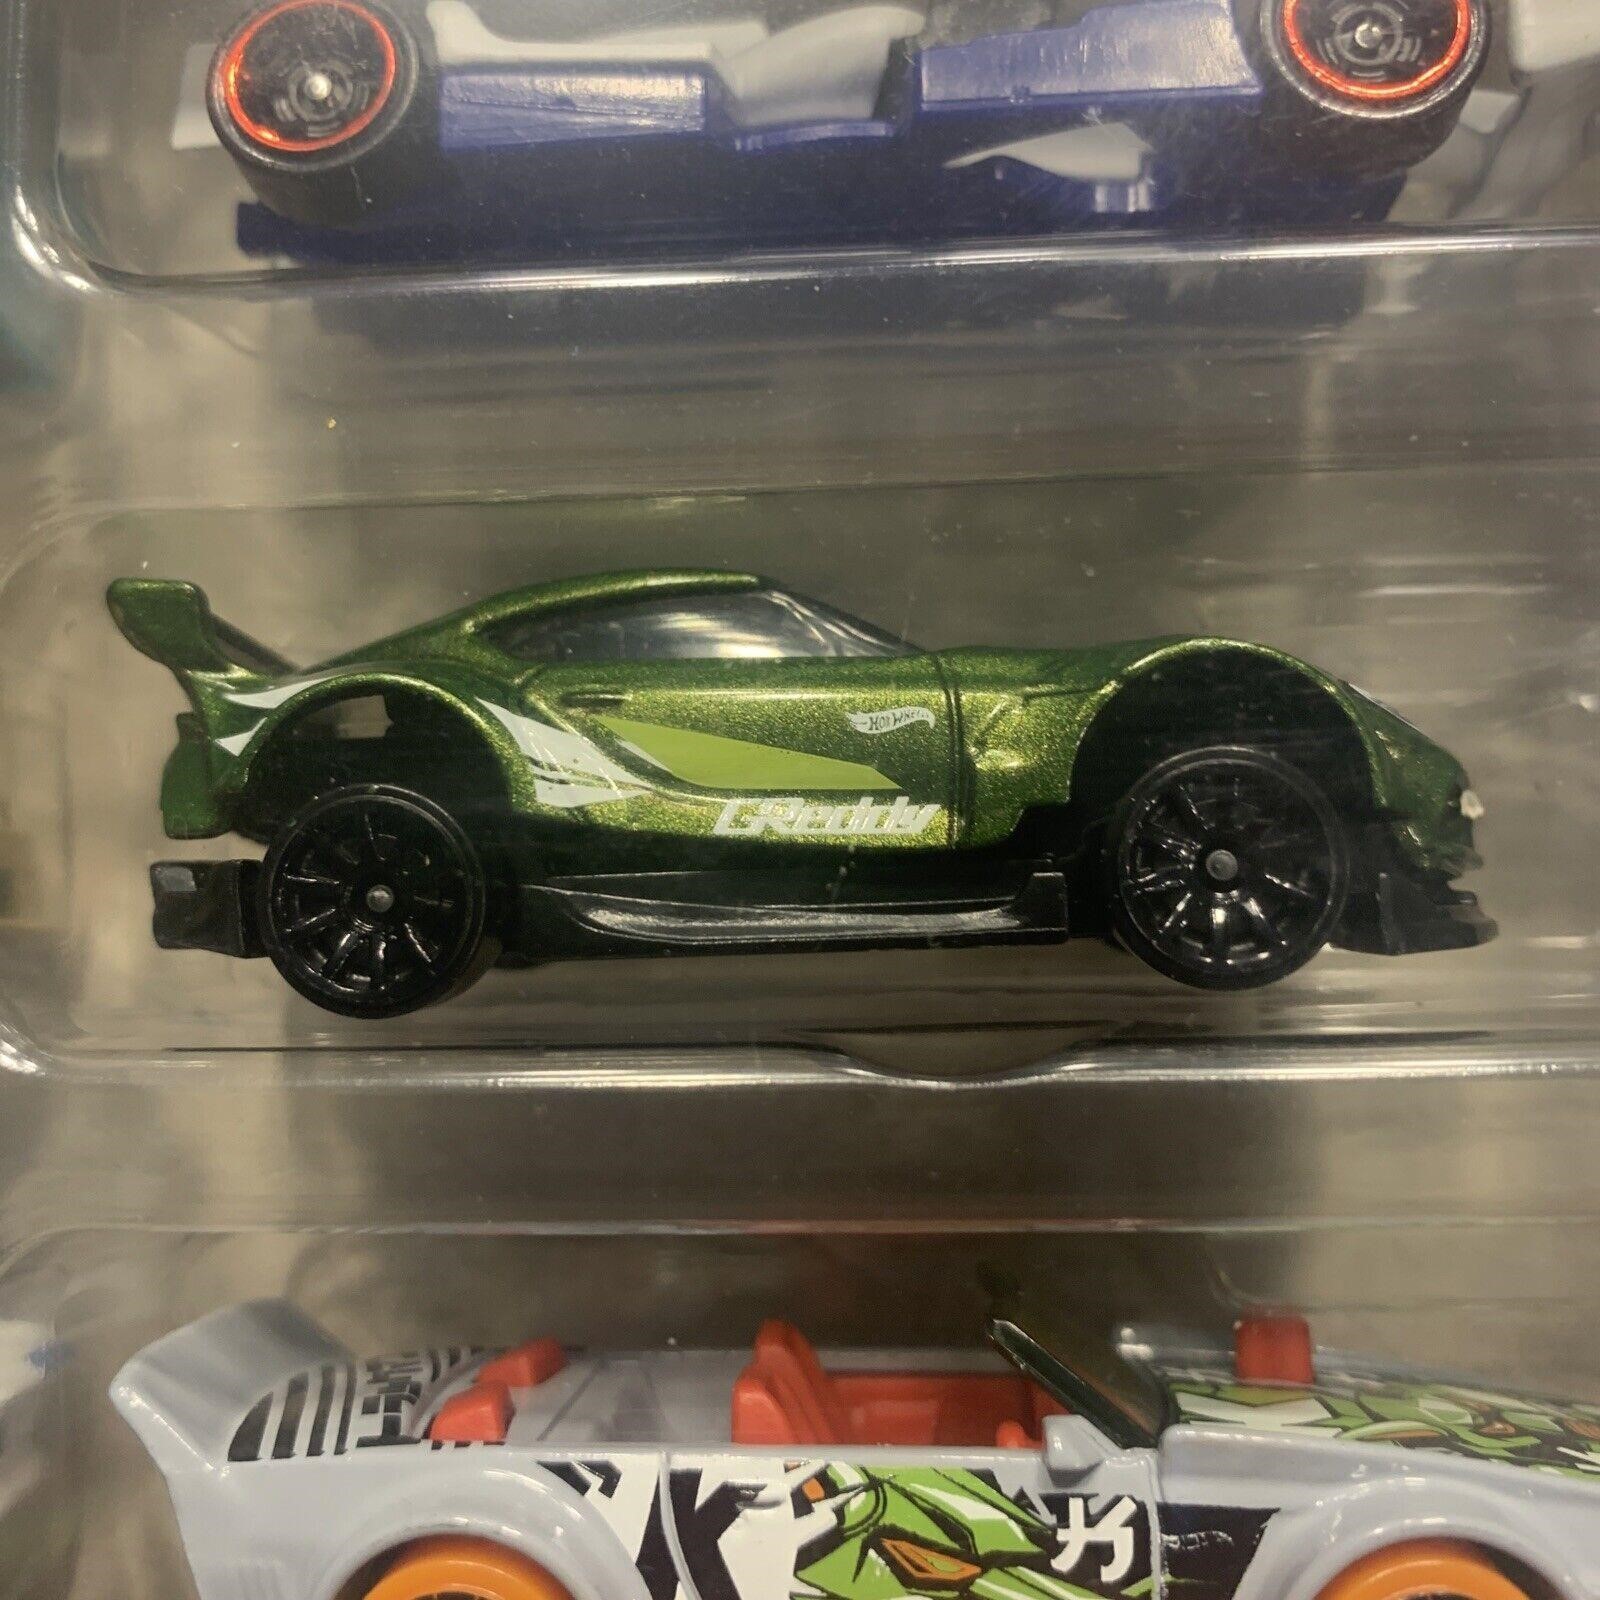 Hot Wheels 8 Basic Include 1 Exclusive Car $25